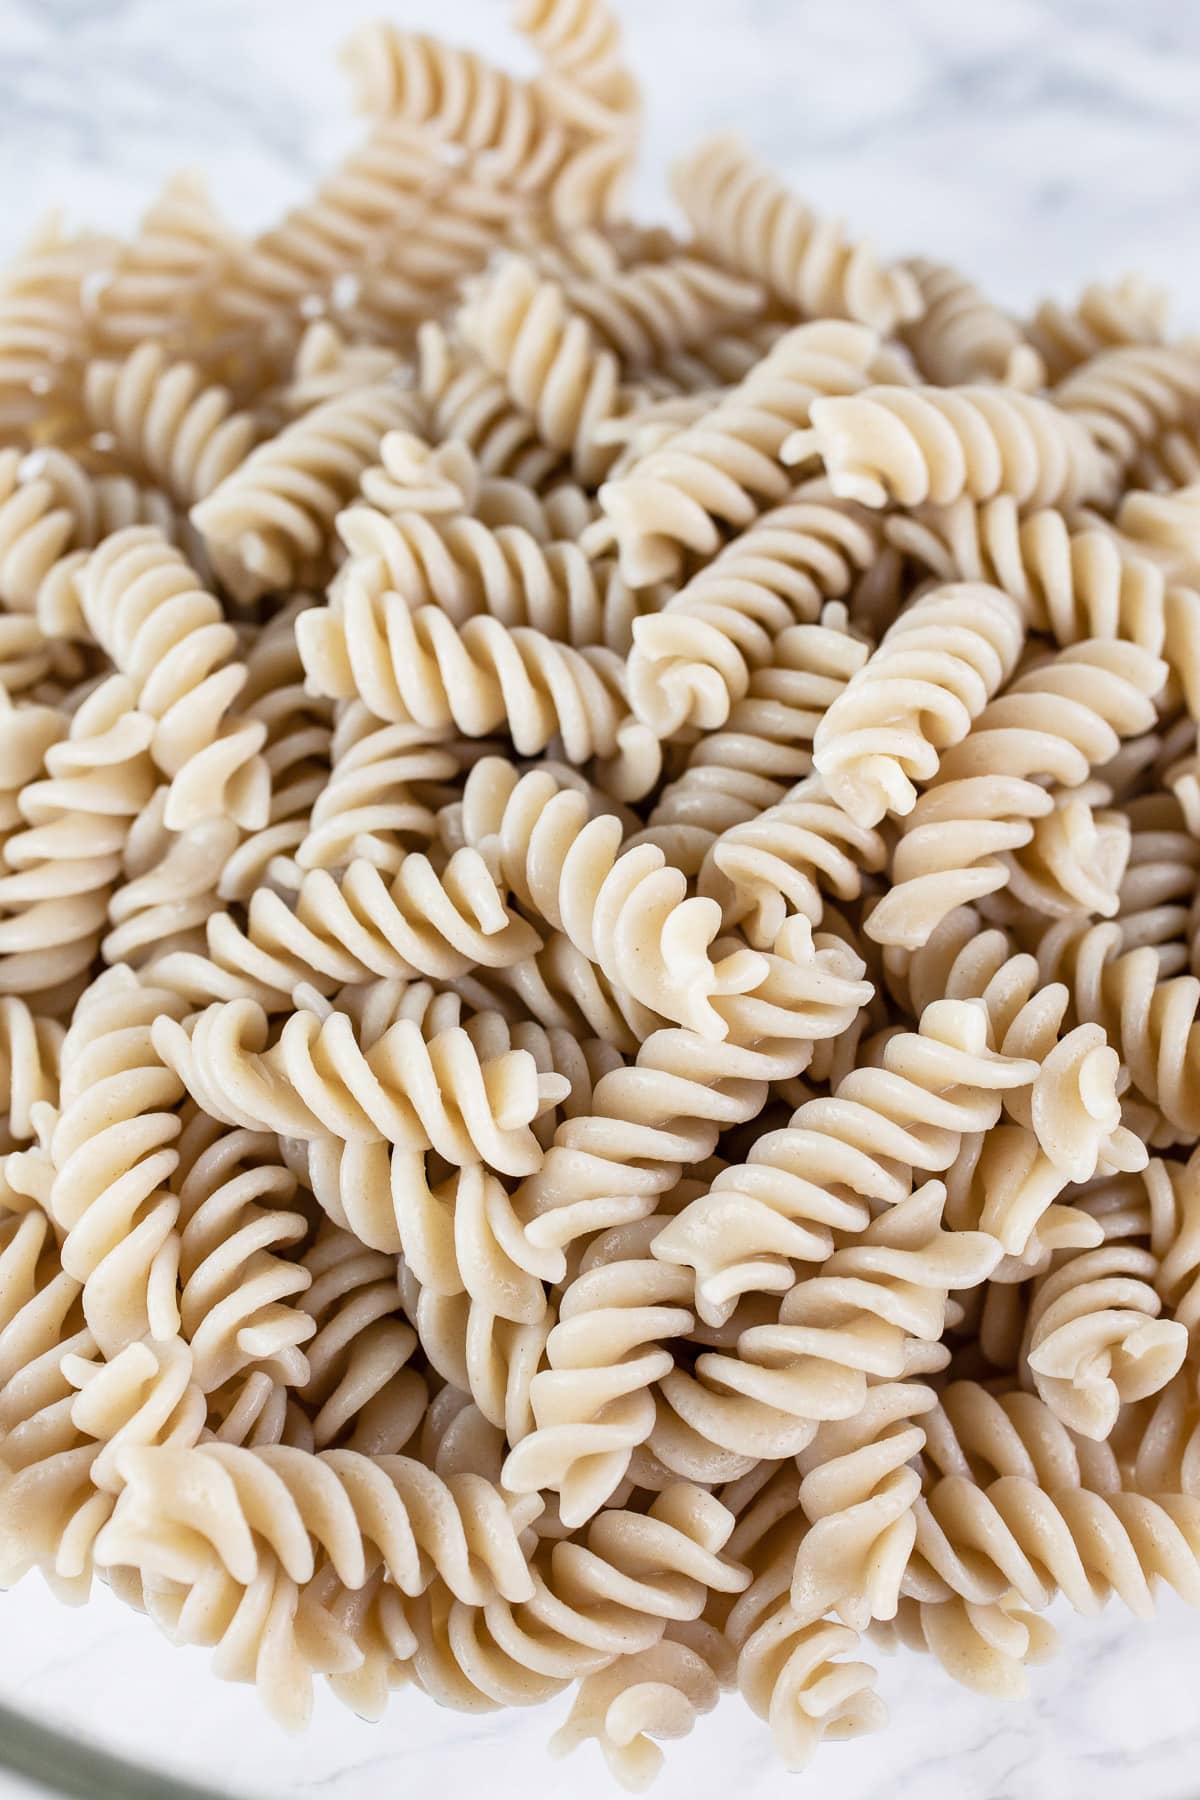 Cooked gluten free fusilli pasta in large glass bowl.